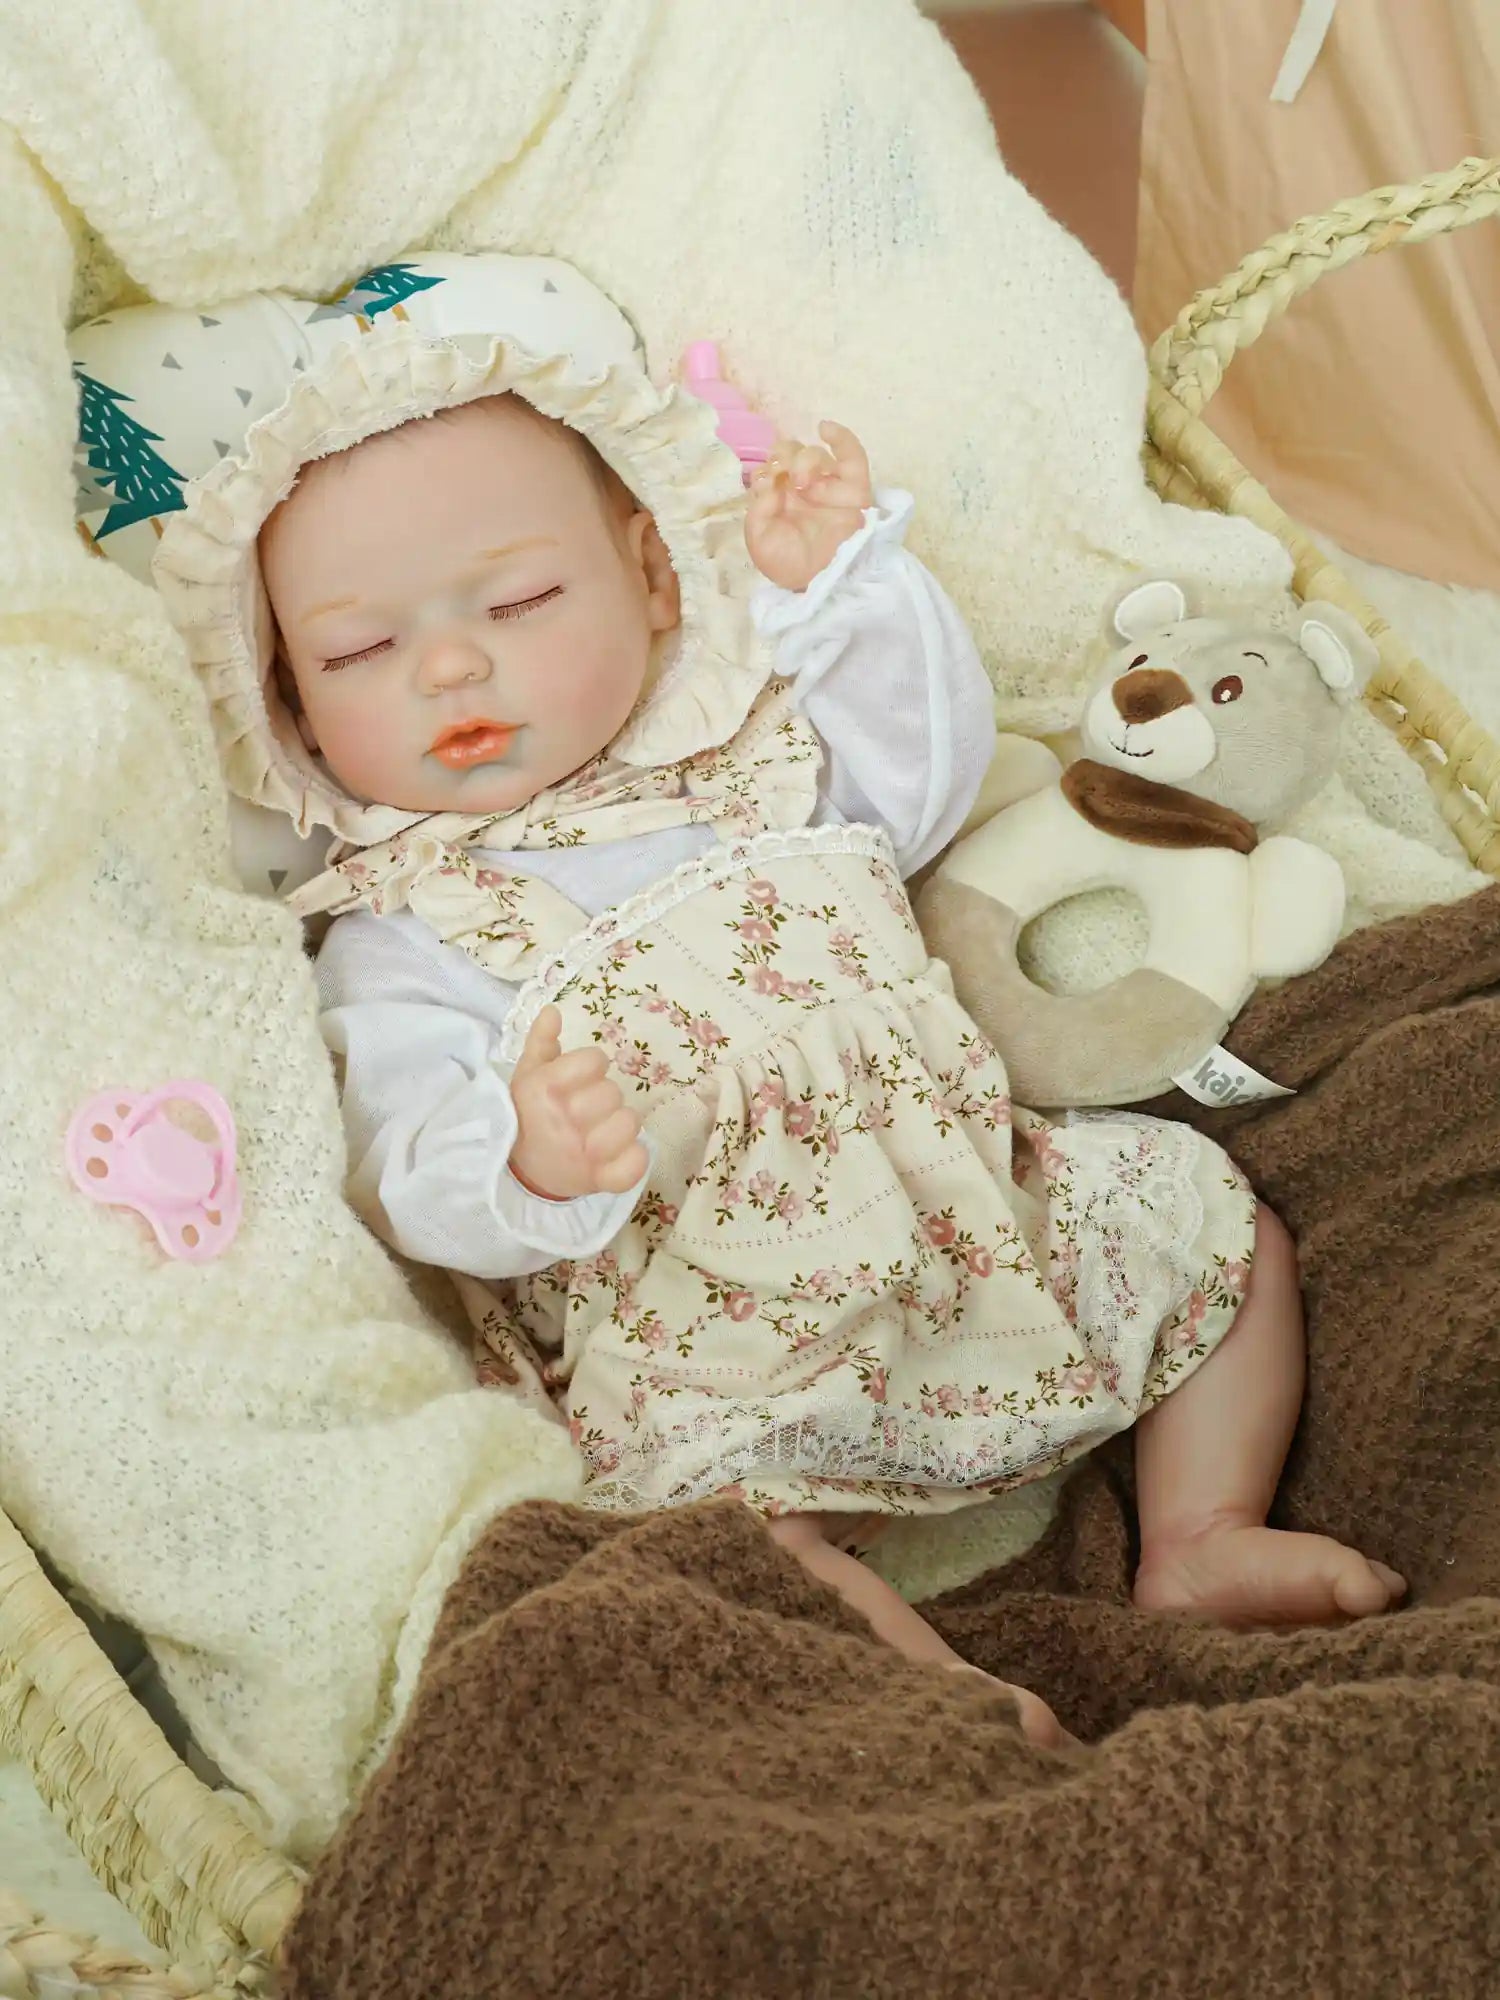 Reborn baby doll in a floral bonnet and dress, sleeping peacefully in a basket, cuddled by plush blankets and a teddy bear, exuding a serene nursery atmosphere.